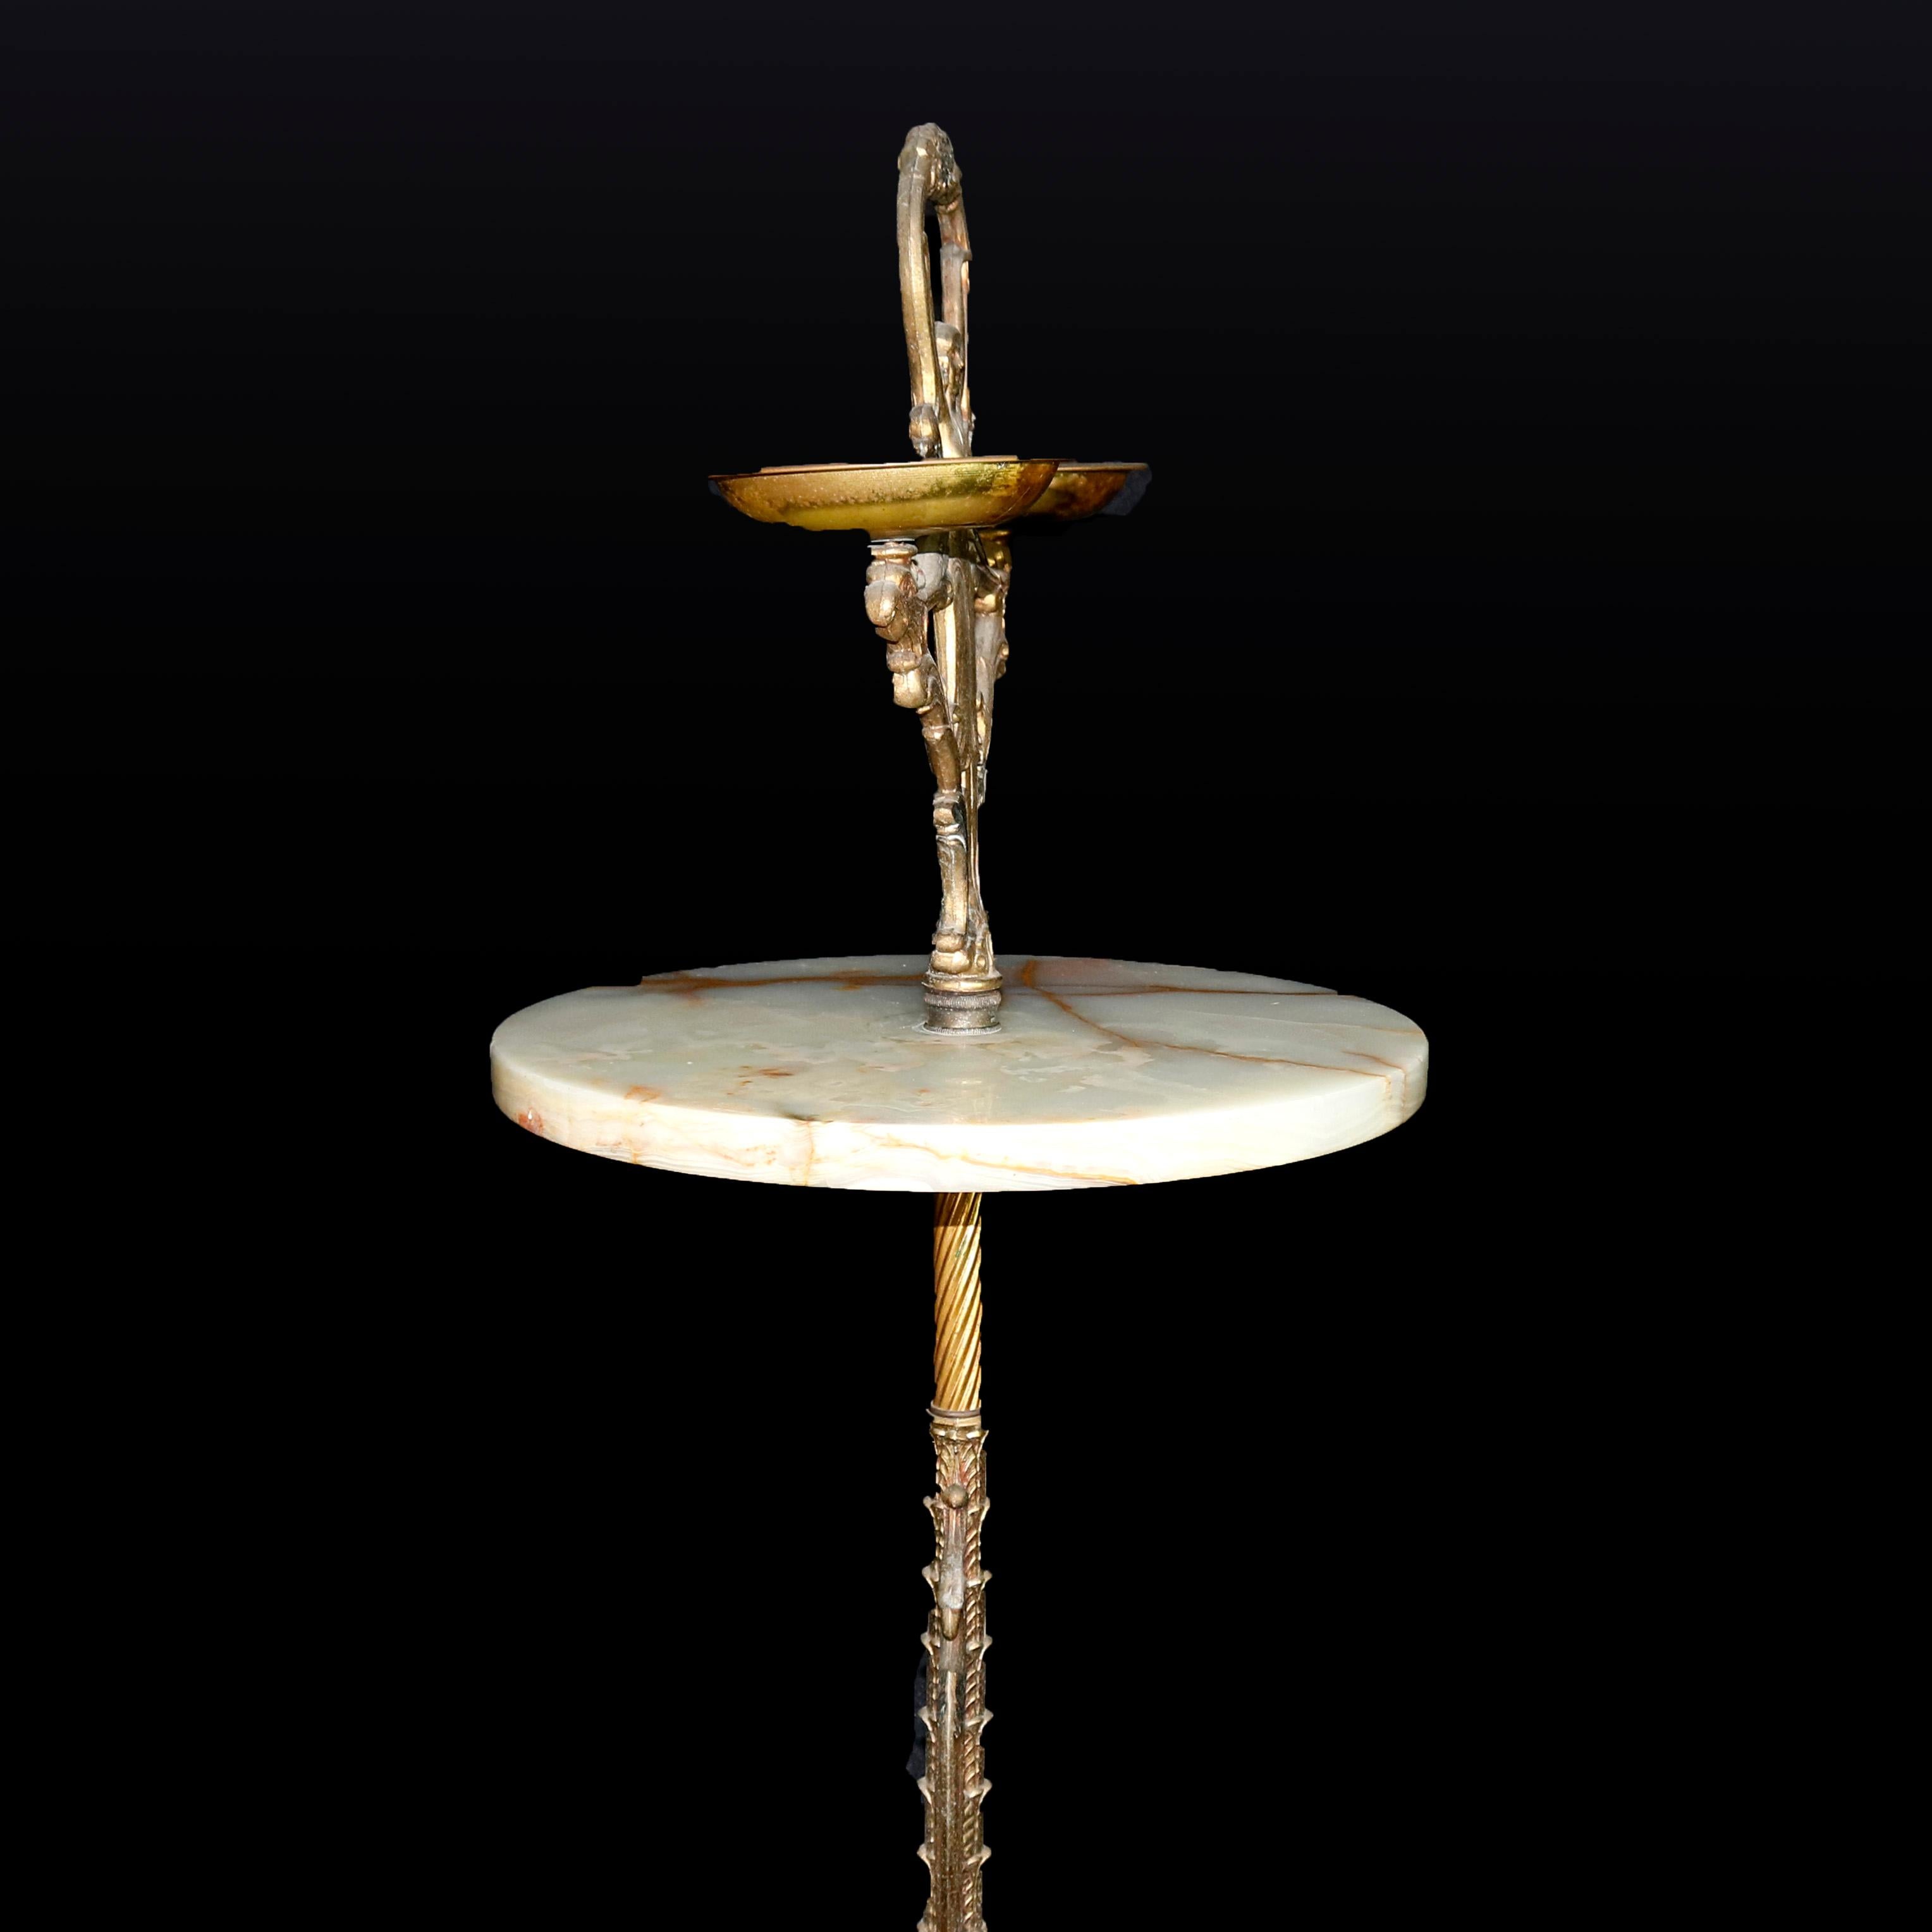 20th Century Antique French Figural Art Nouveau Onyx and Bronze Smoking Stand, circa 1910